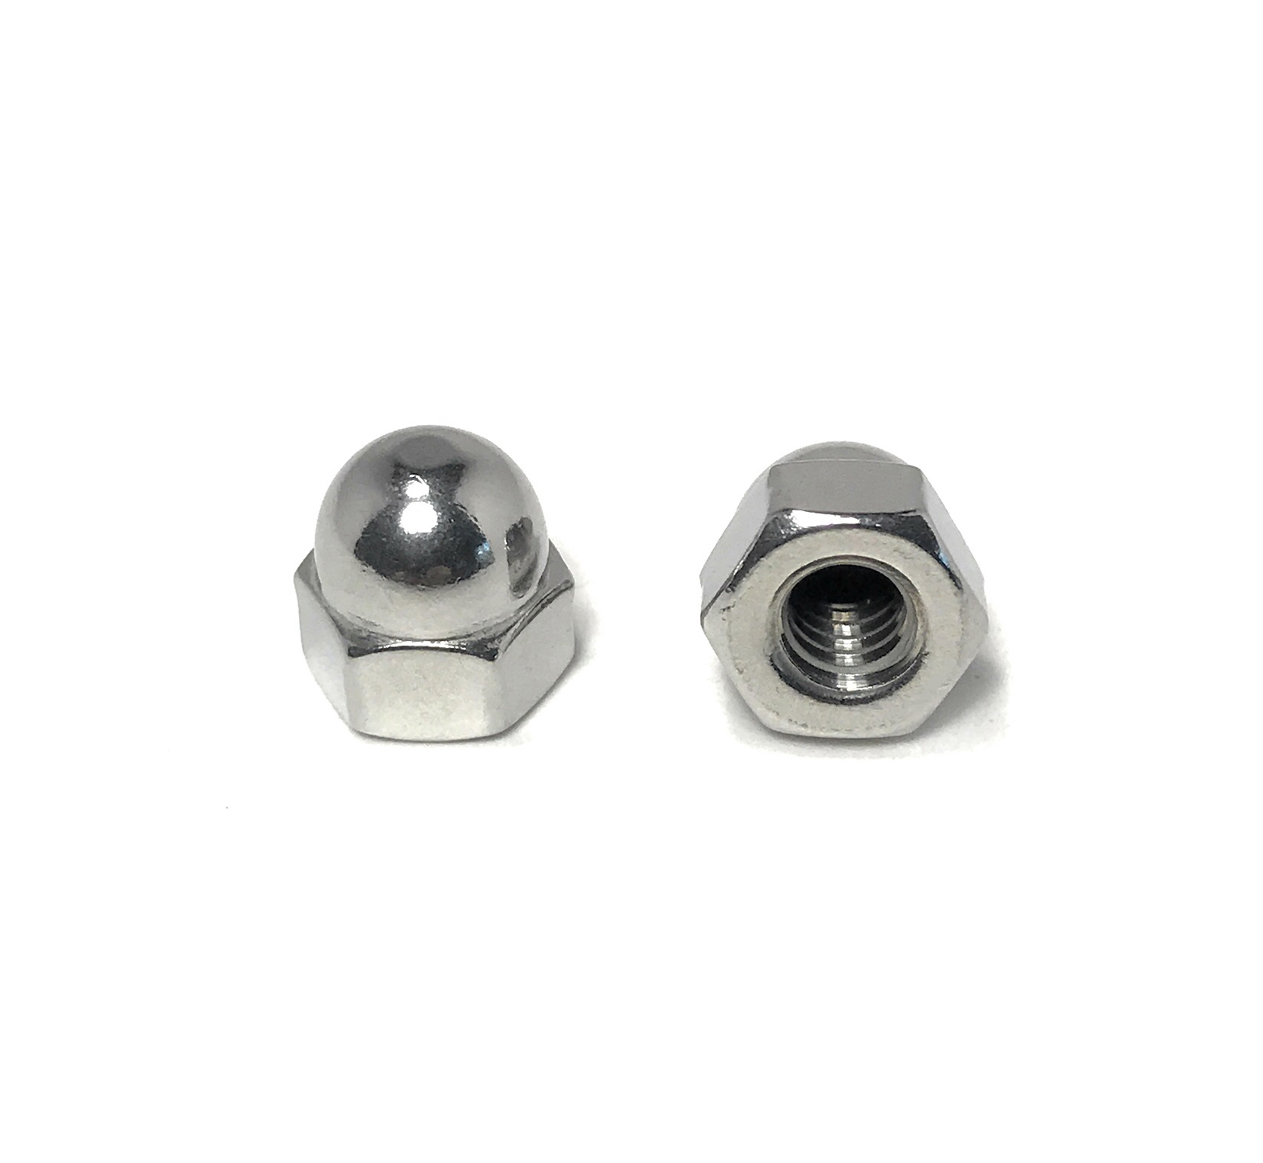 25 25 Pieces 4-40 Stainless Steel Hex Acorn Cap Nuts 